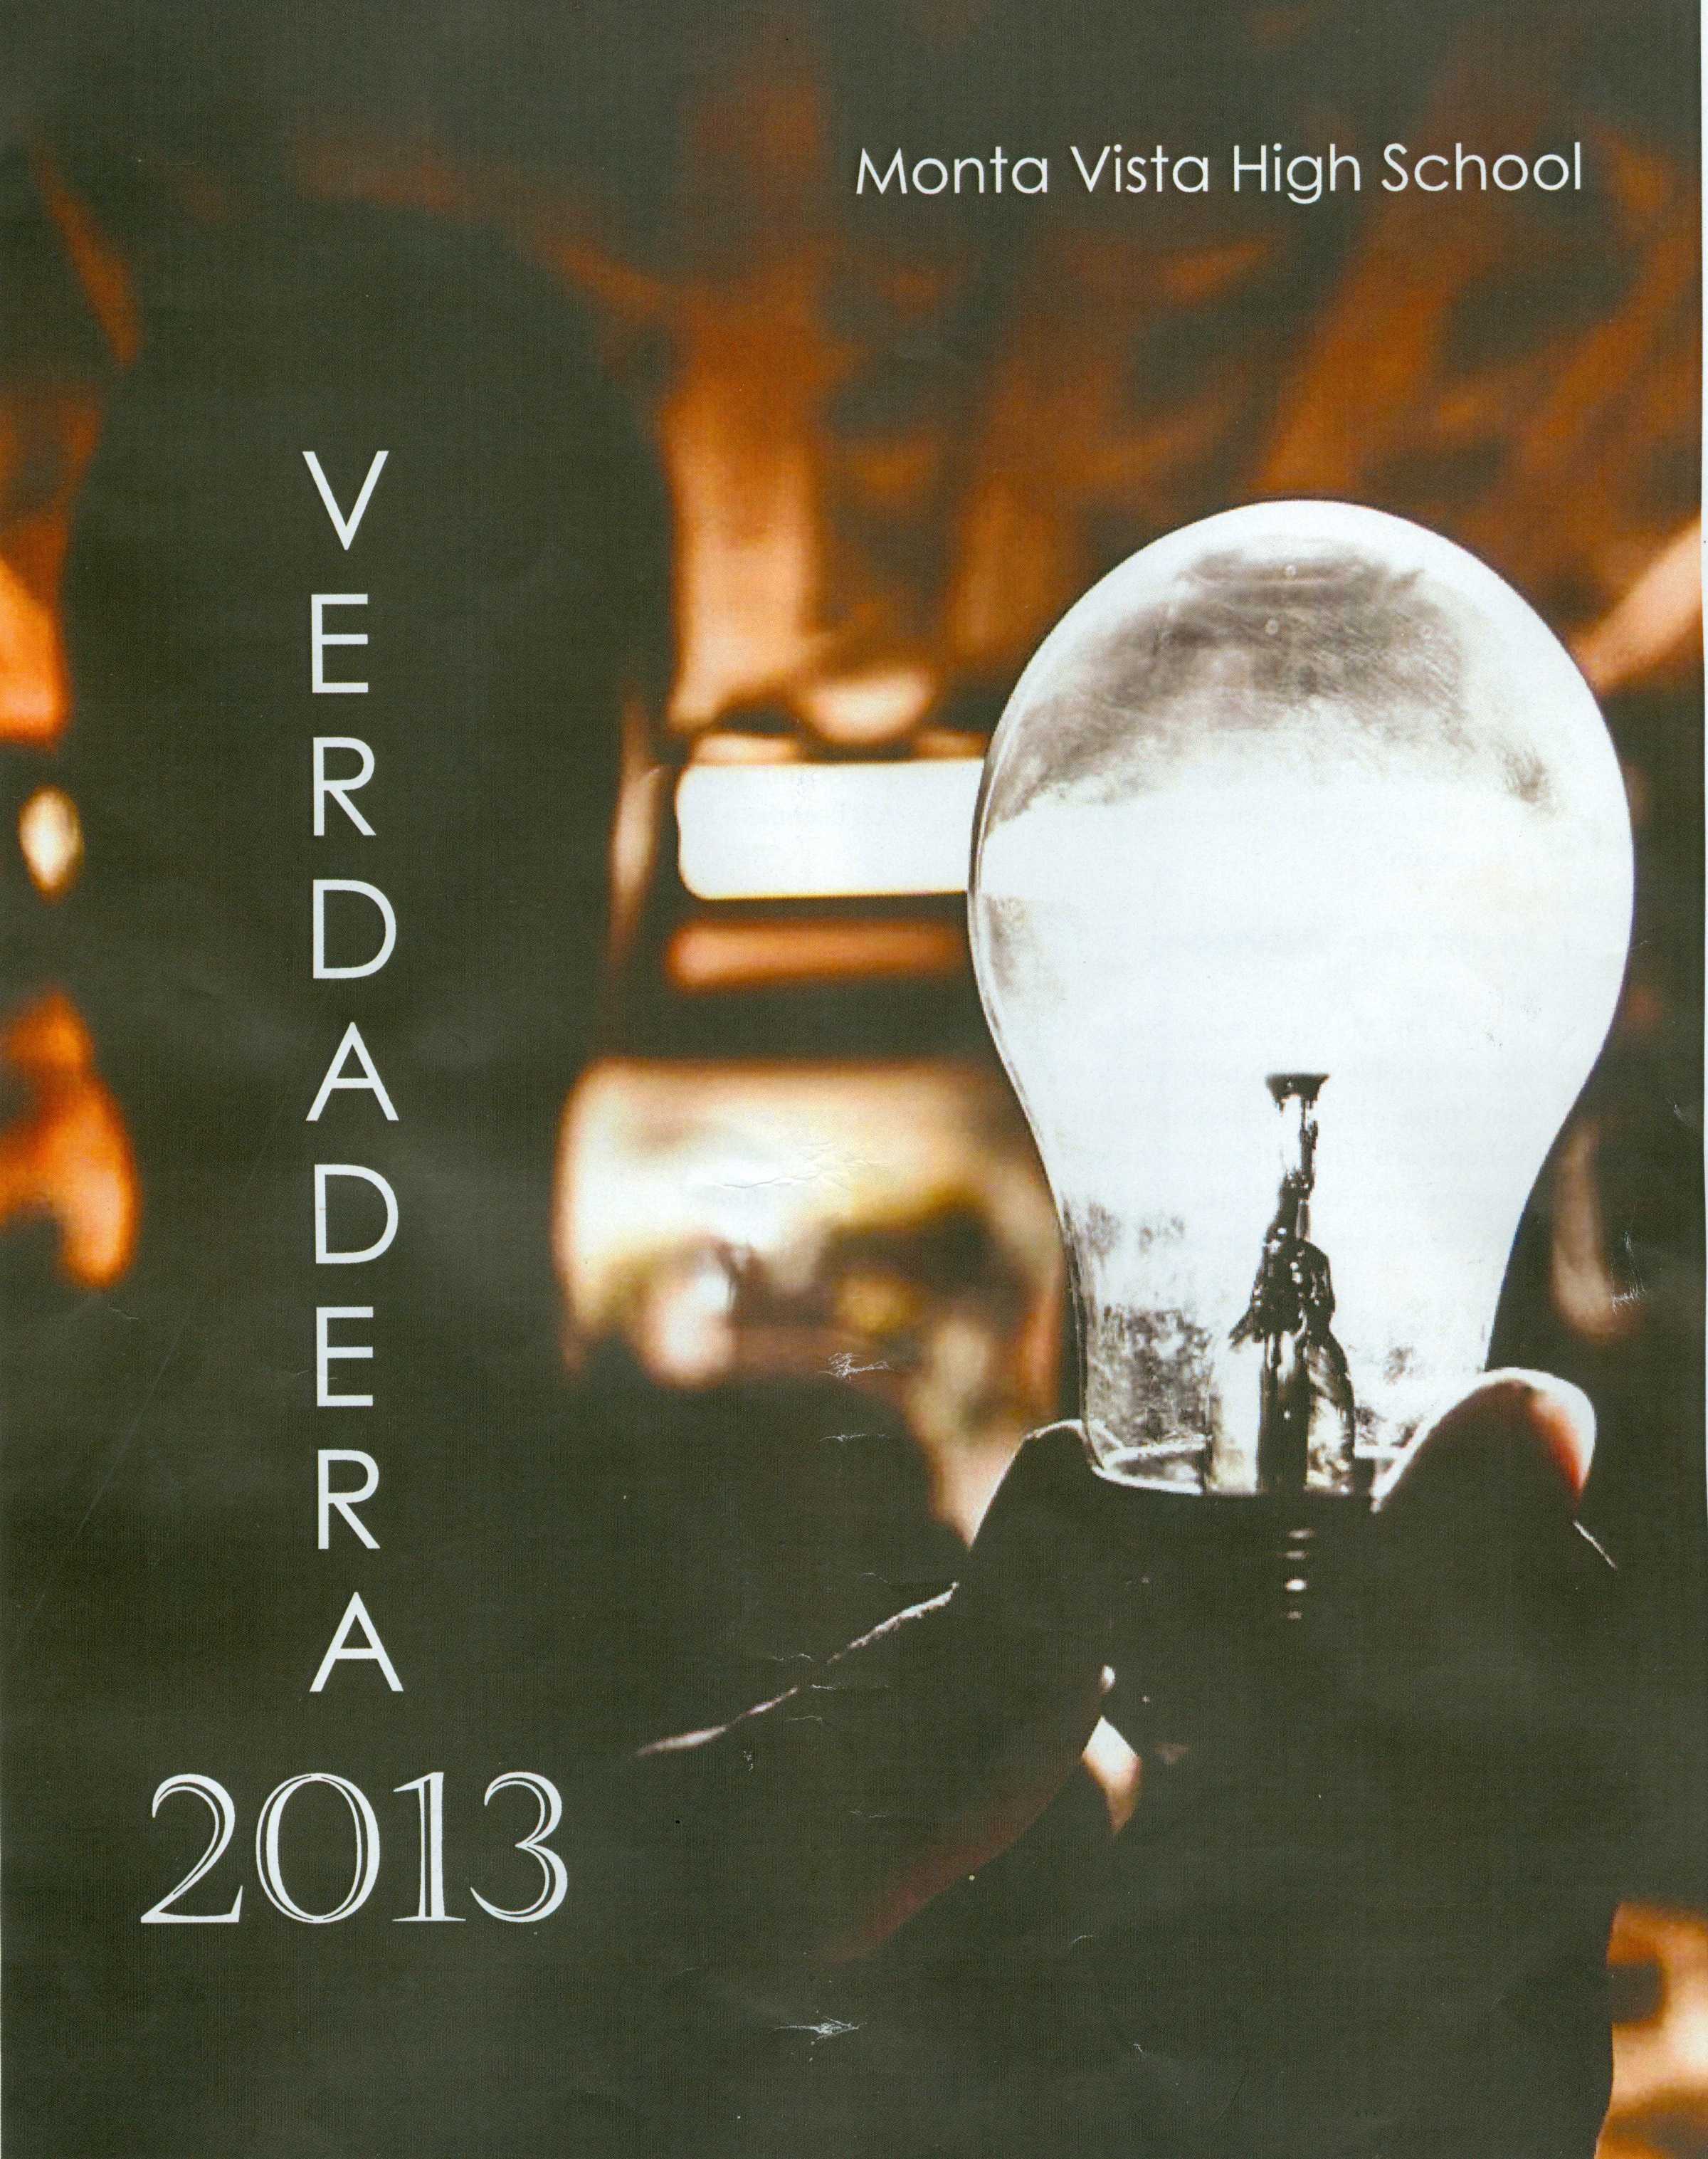 Verdadera Publication in 2013. The magazine was officially started in 2005 by Hung Wei, parent of former students at MVHS.